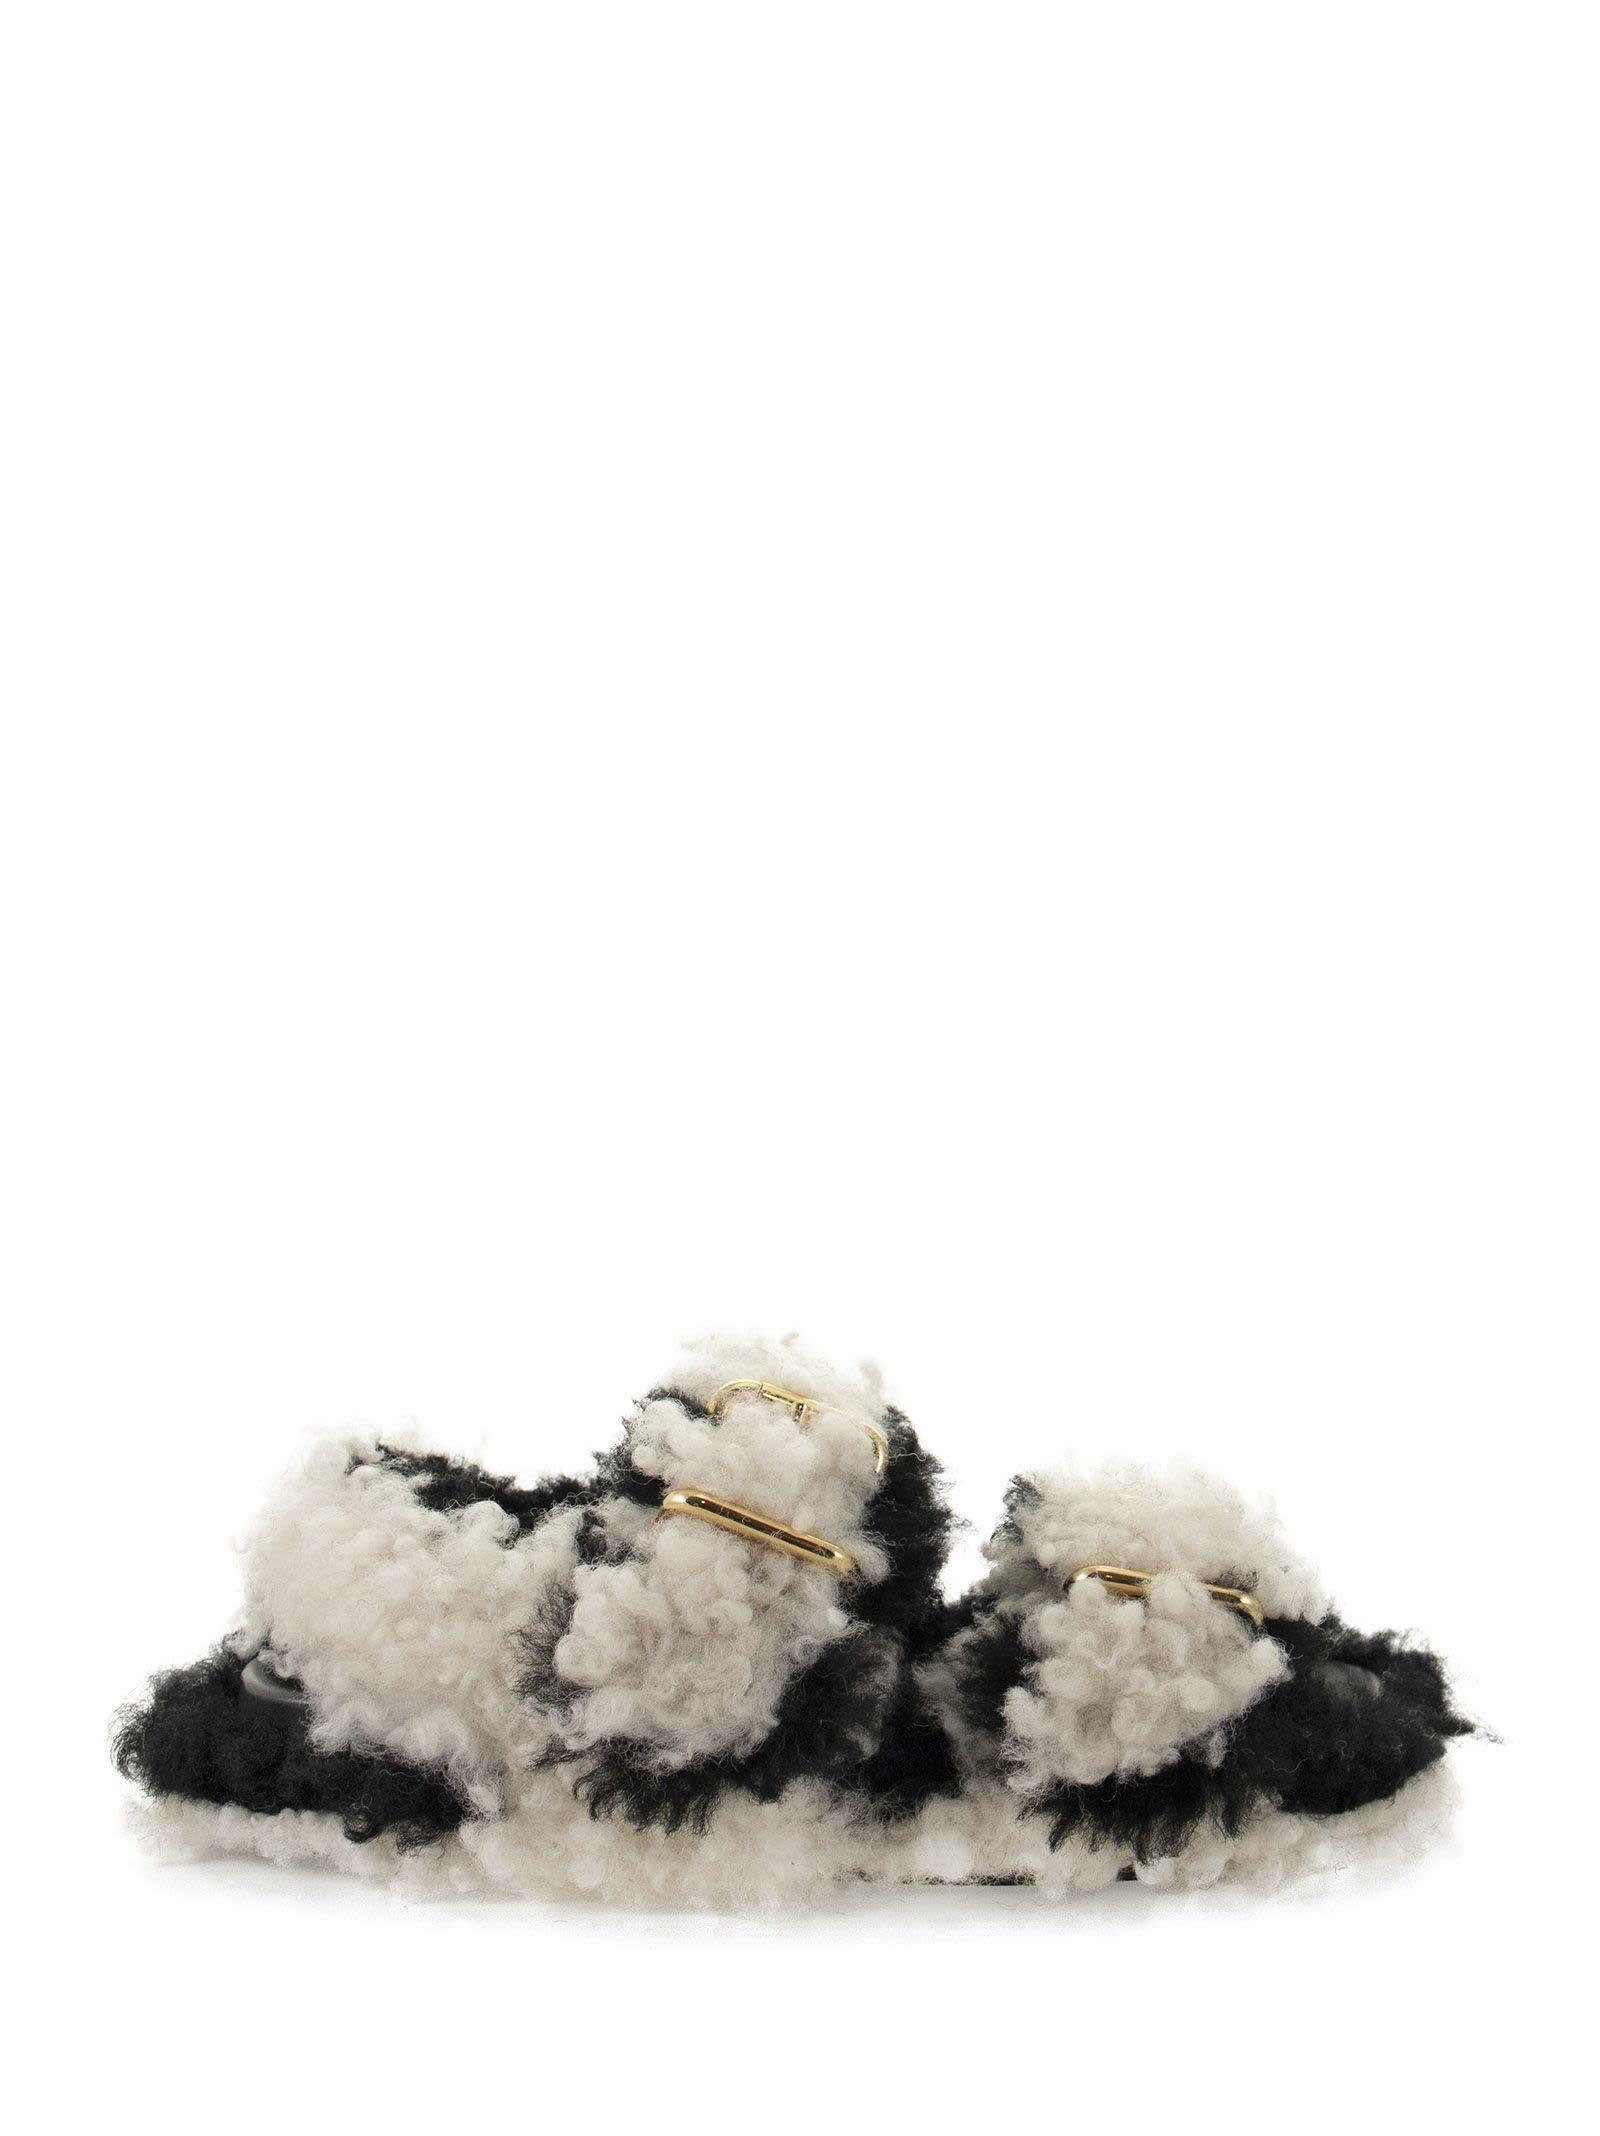 Buy Marni Fussbett - Shearling Buckled Sandals online, shop Marni shoes with free shipping